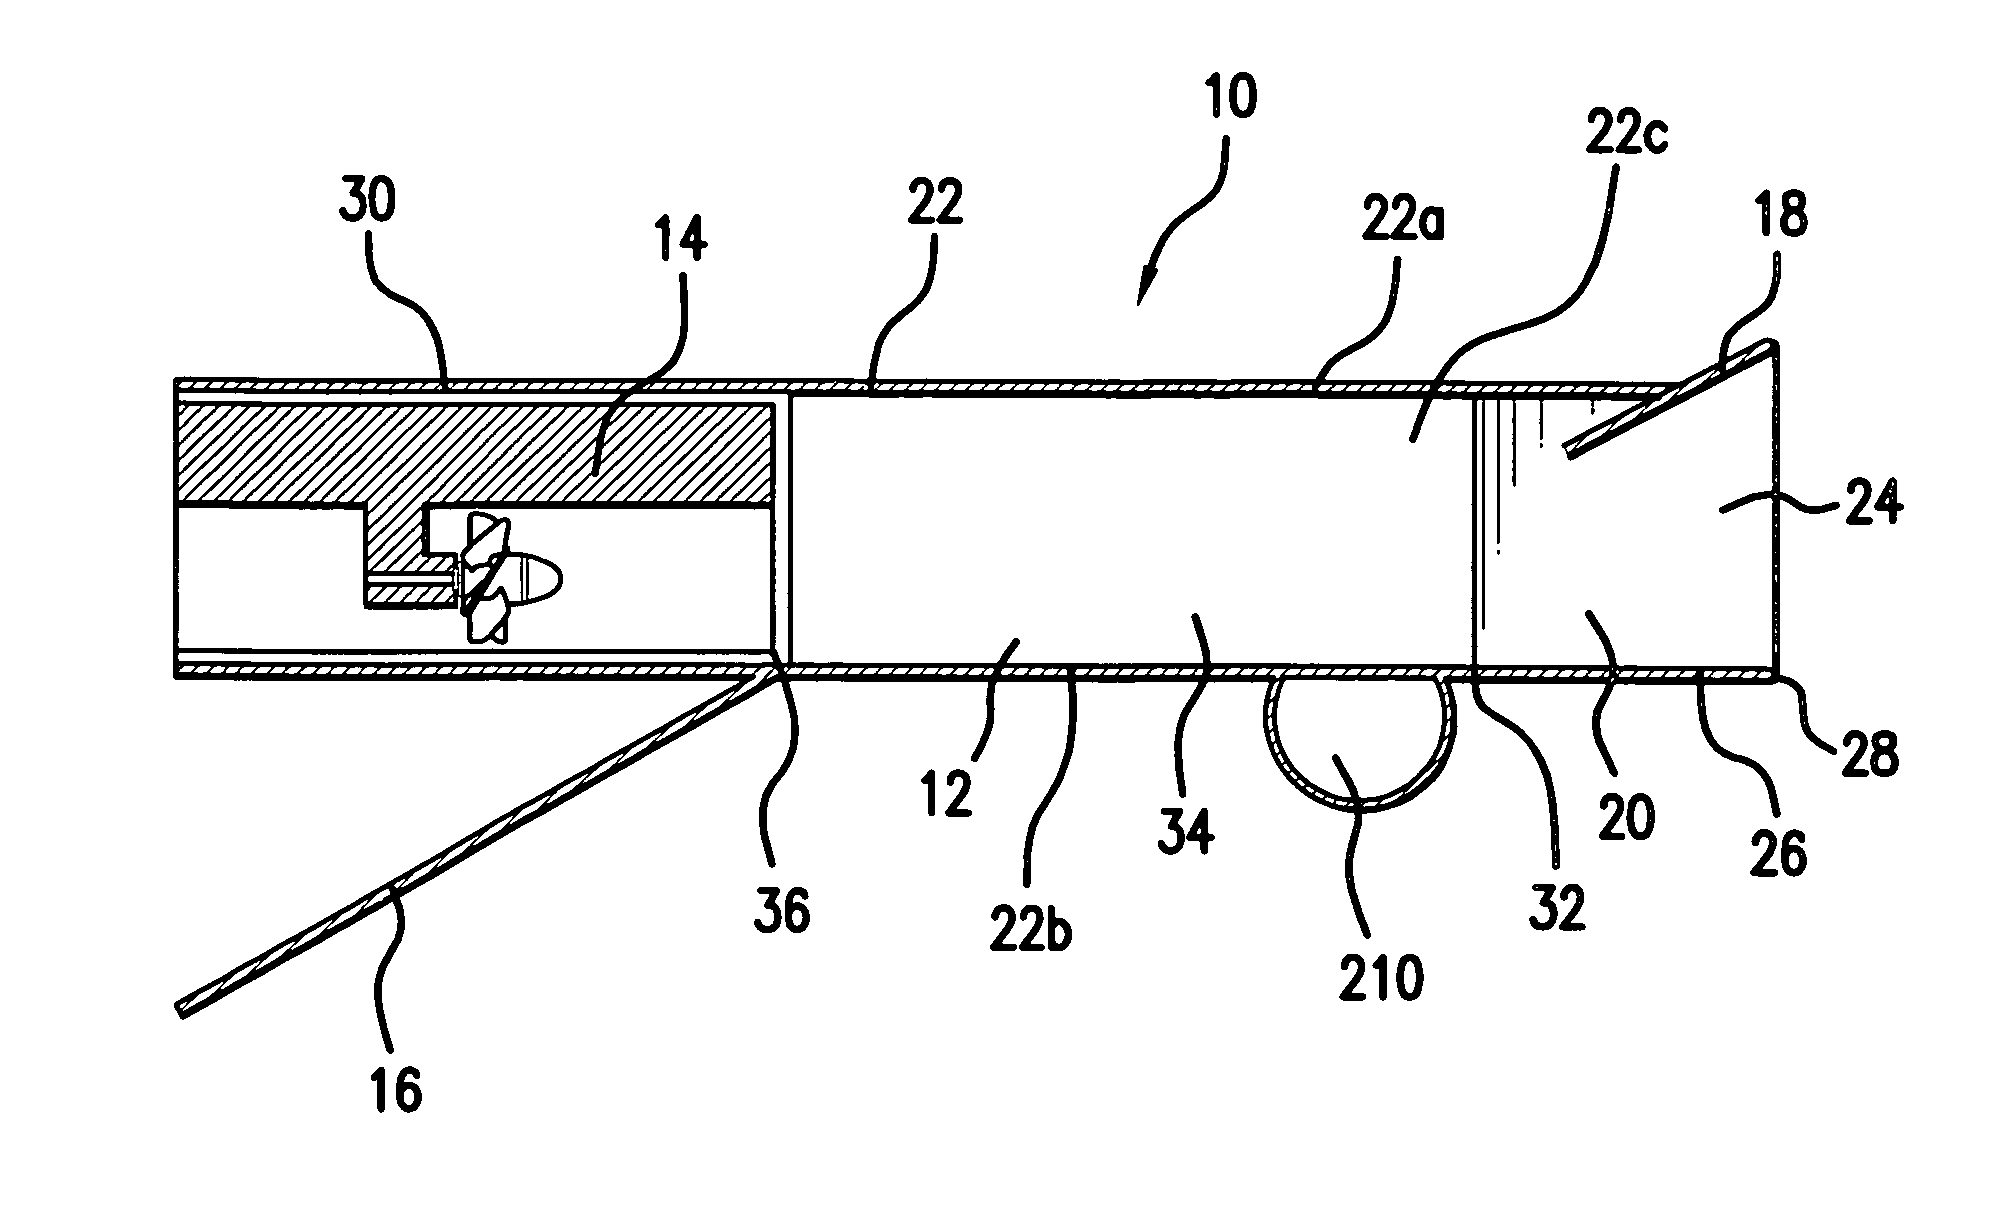 Shoaling water energy conversion device